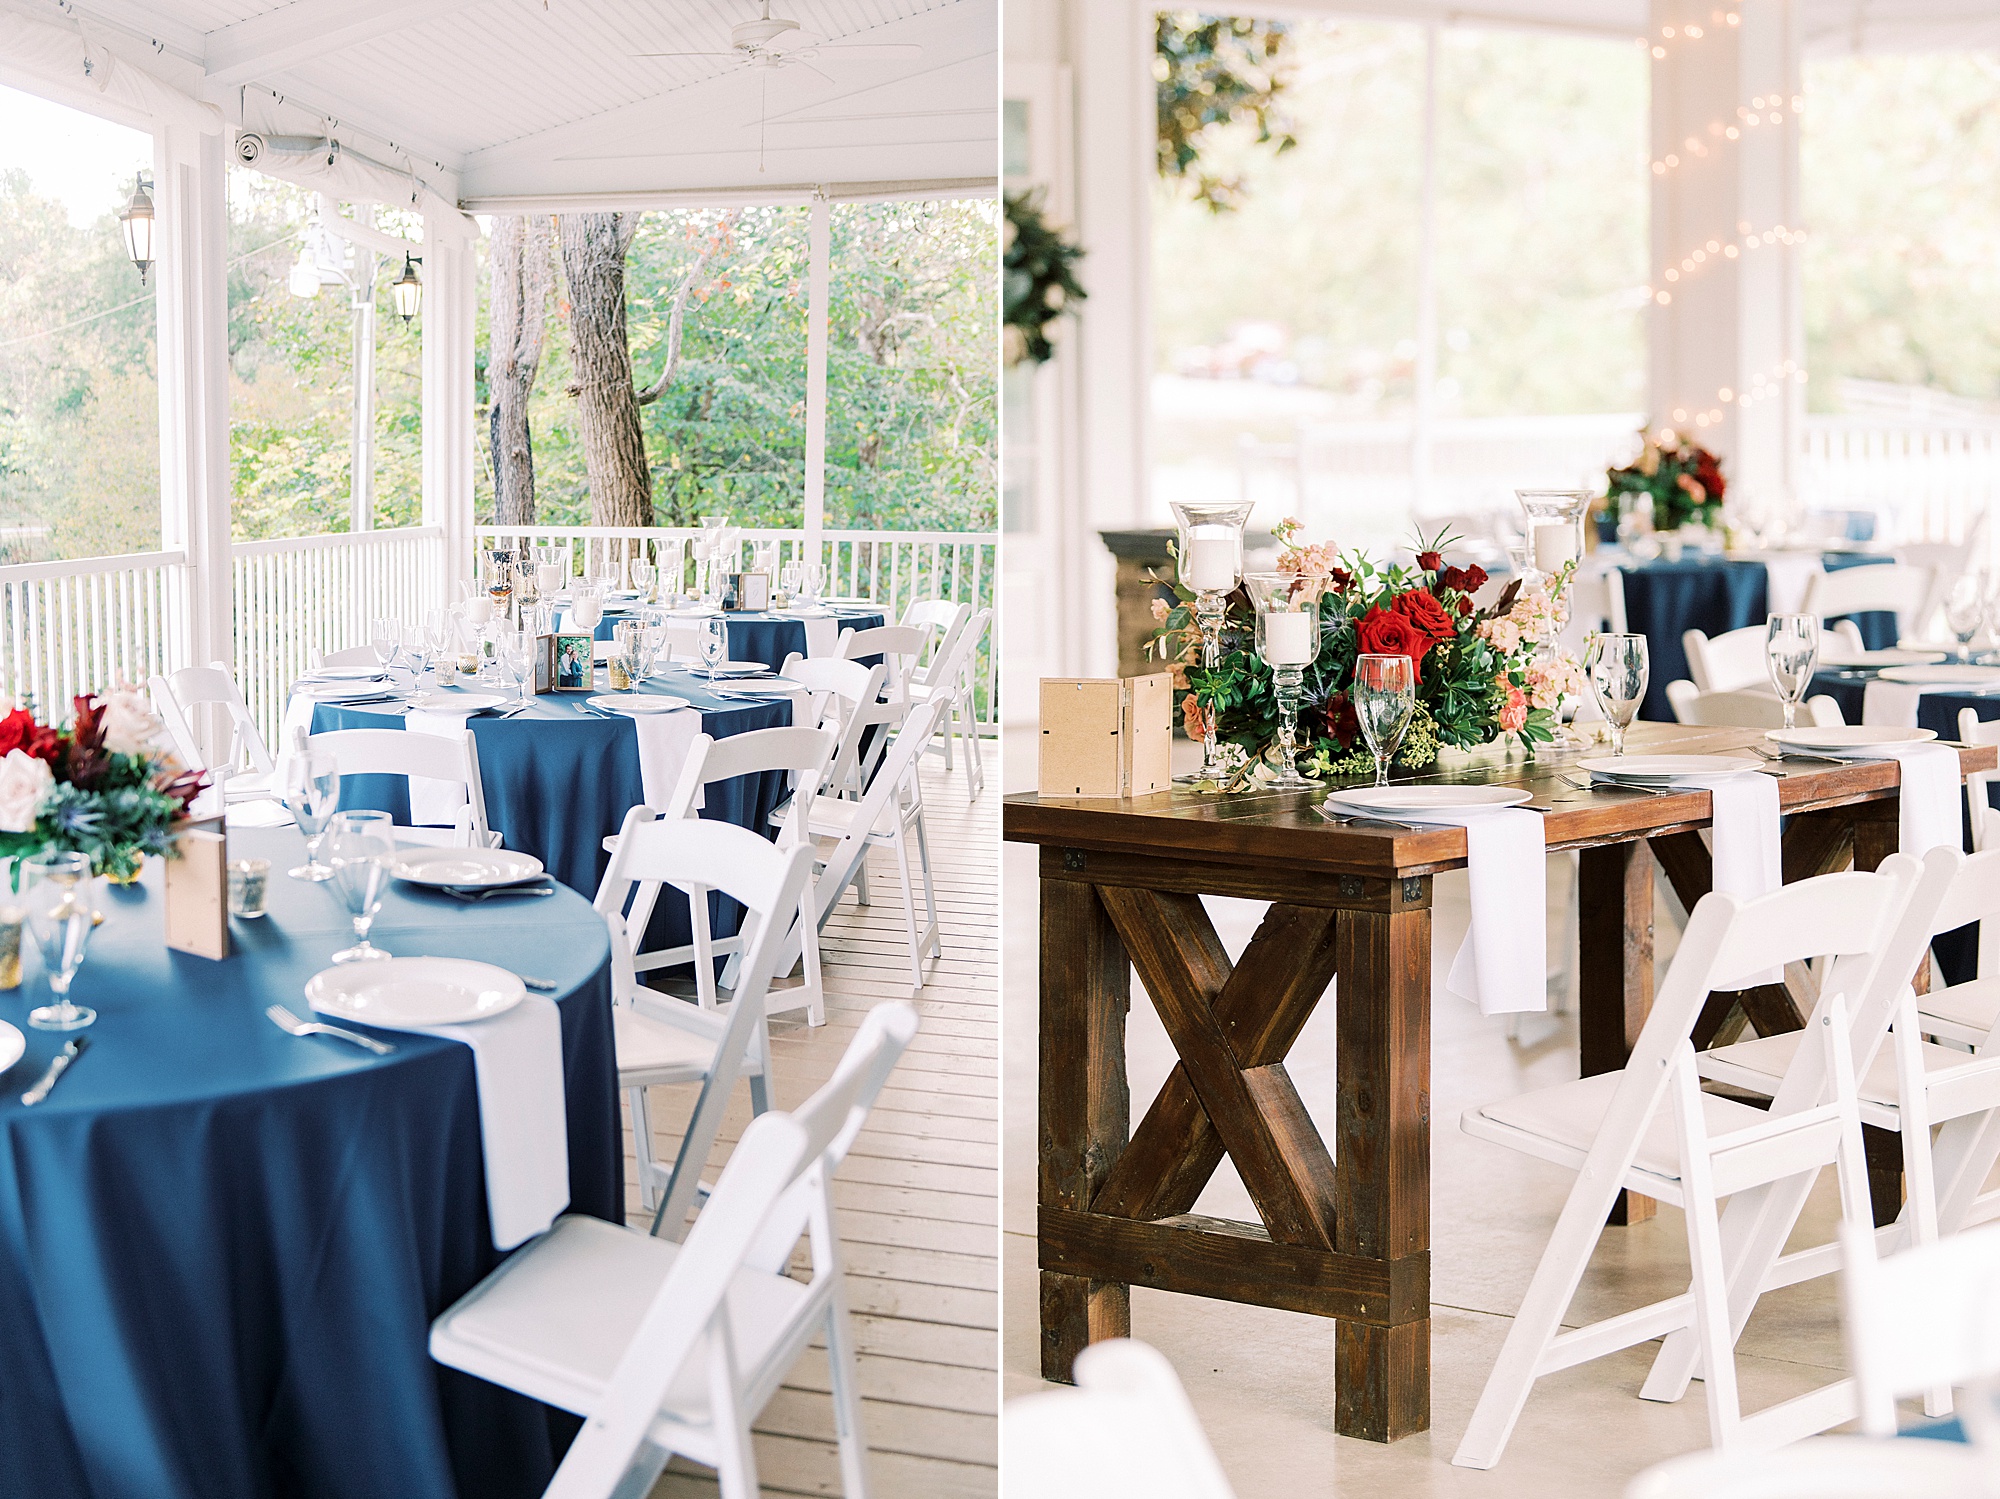 NC wedding reception with navy and white details at Vesuvius Vineyards